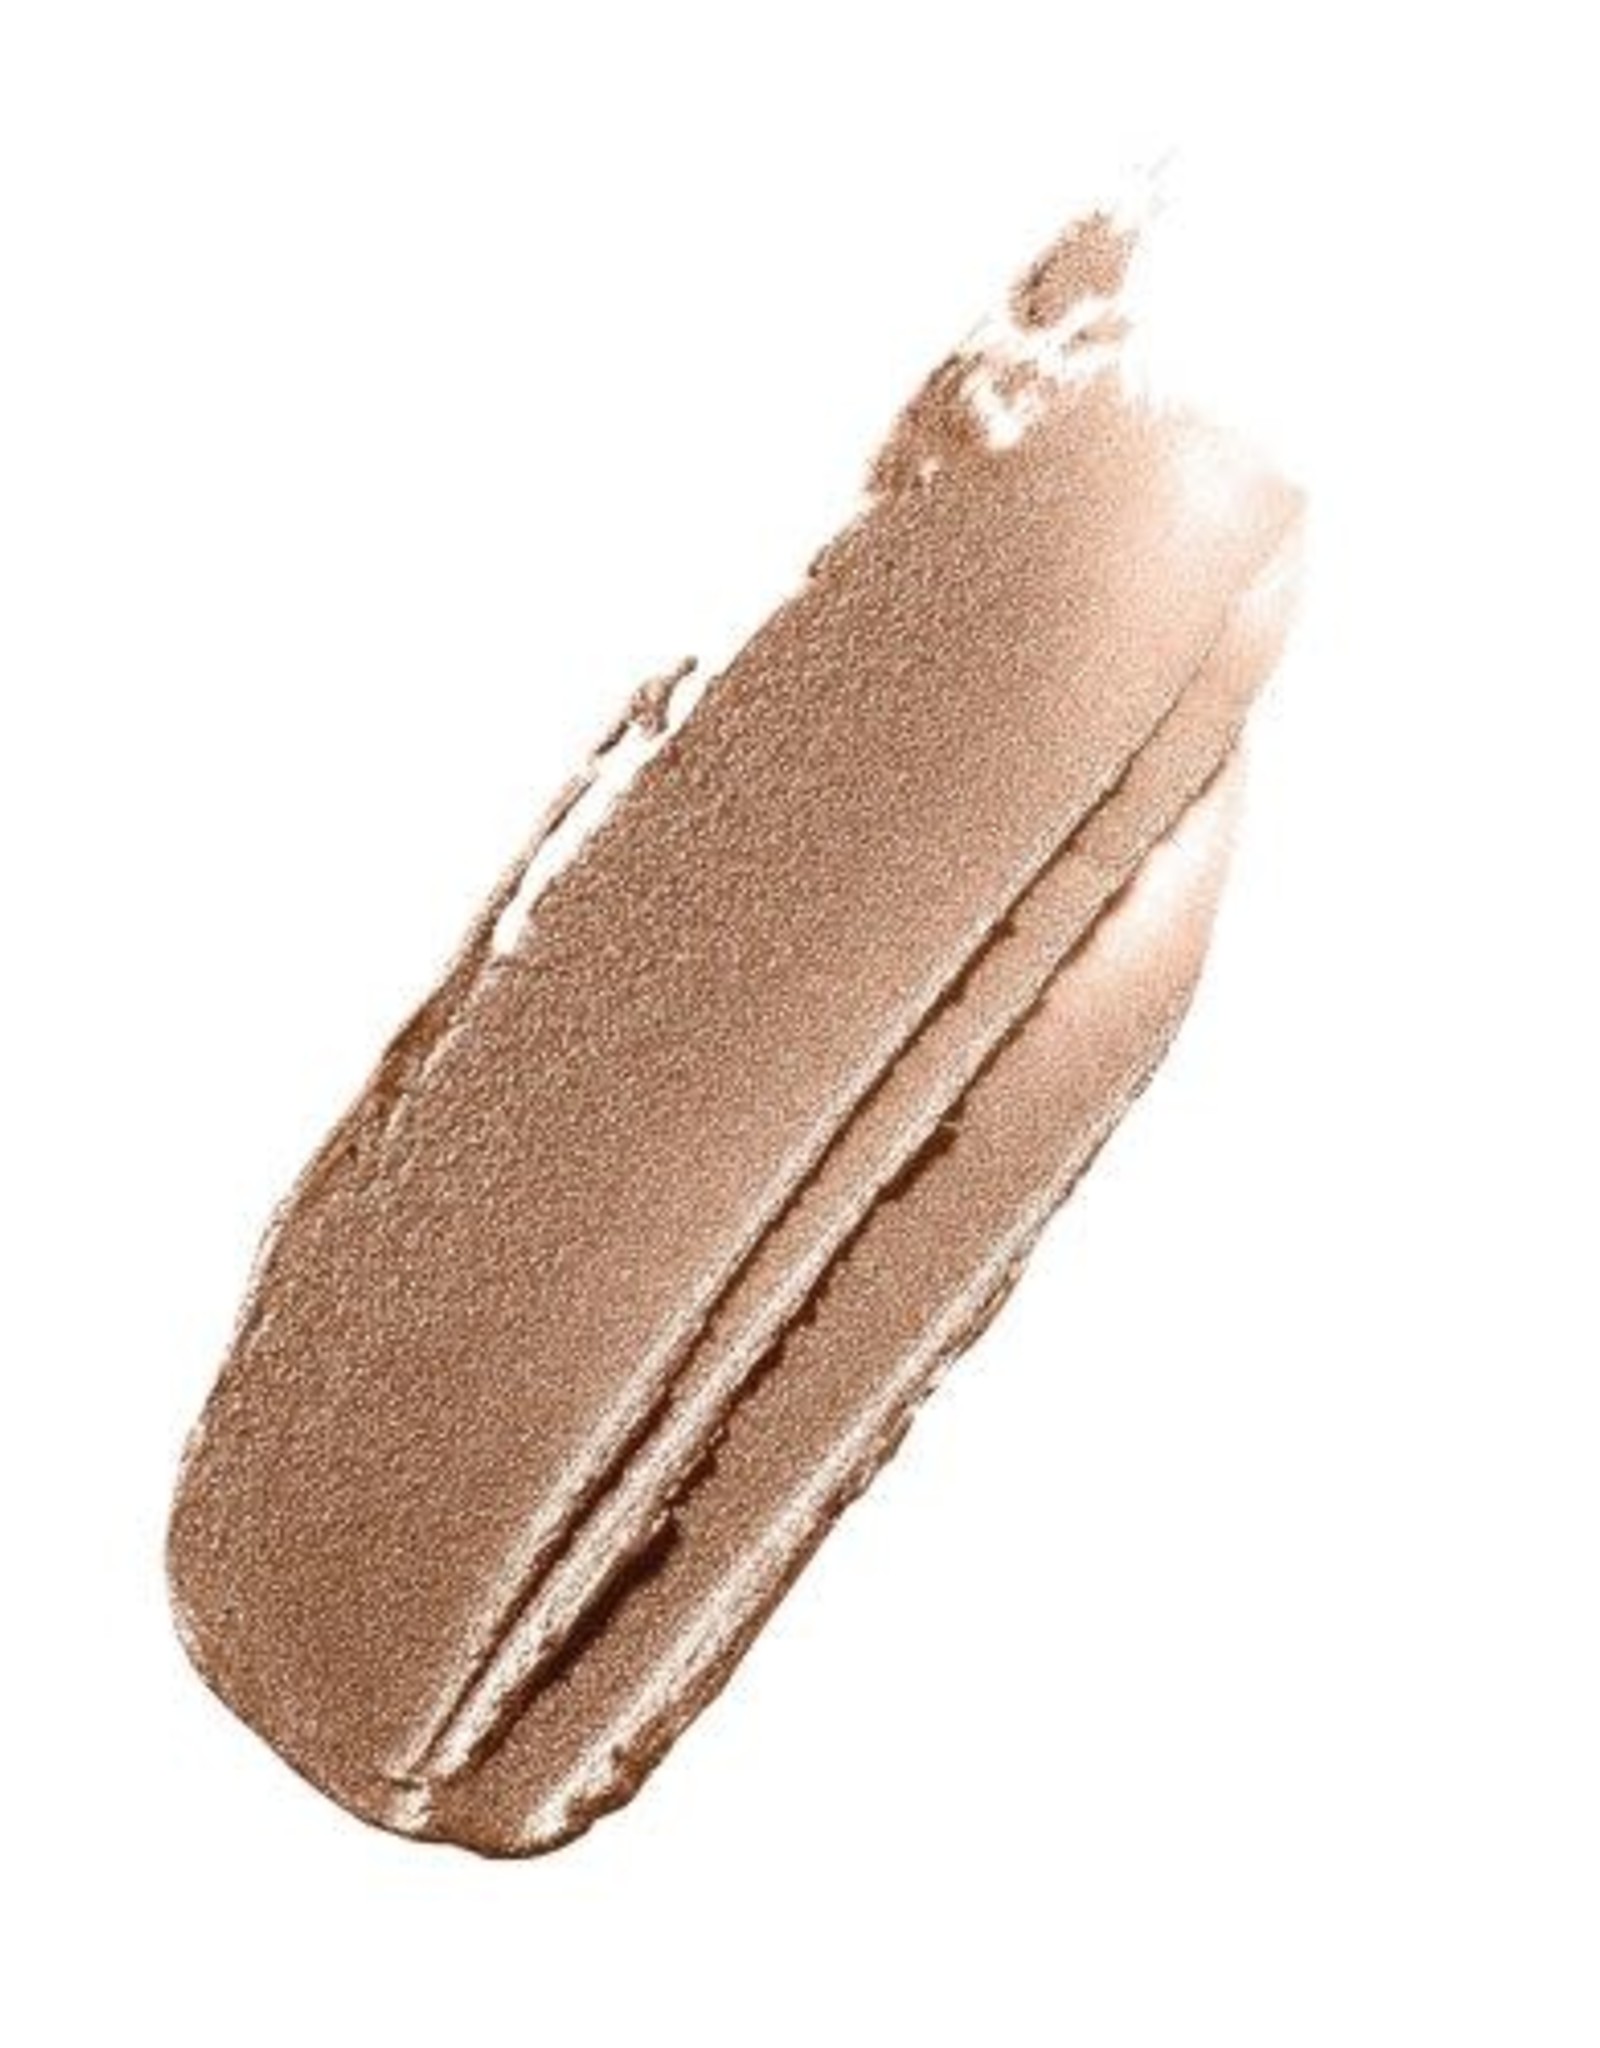 Jane Iredale Smooth Affair For Eyes